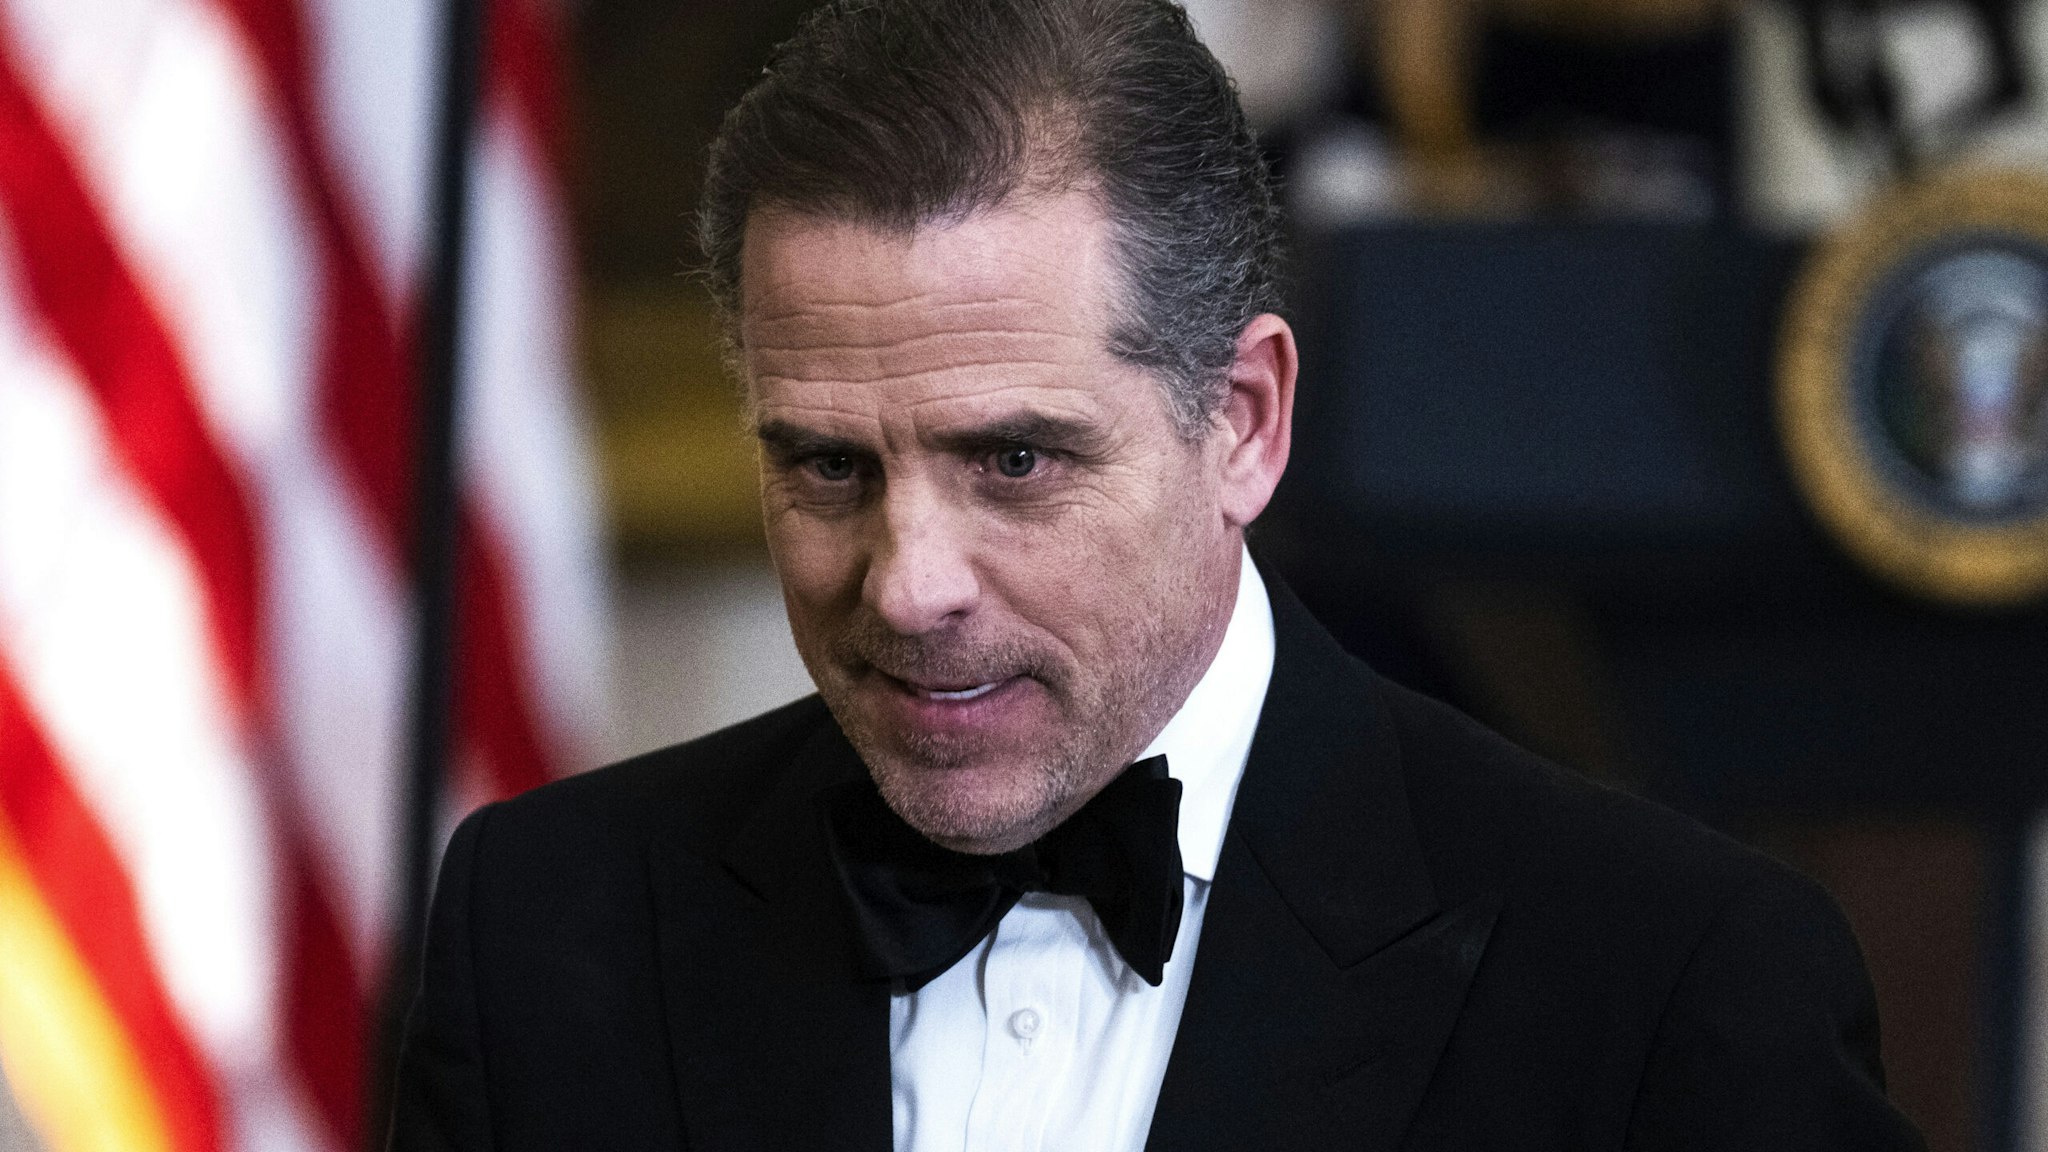 UNITED STATES - DECEMBER 4: Hunter Biden attends the Kennedy Center Honorees reception in the East Room of the White House on Sunday, December 4, 2022. The honorees were George Clooney, Amy Grant, Gladys Knight, Tania Leon, and the band members of U2, Bono, The Edge, Adam Clayton, and Larry Mullen, Jr.